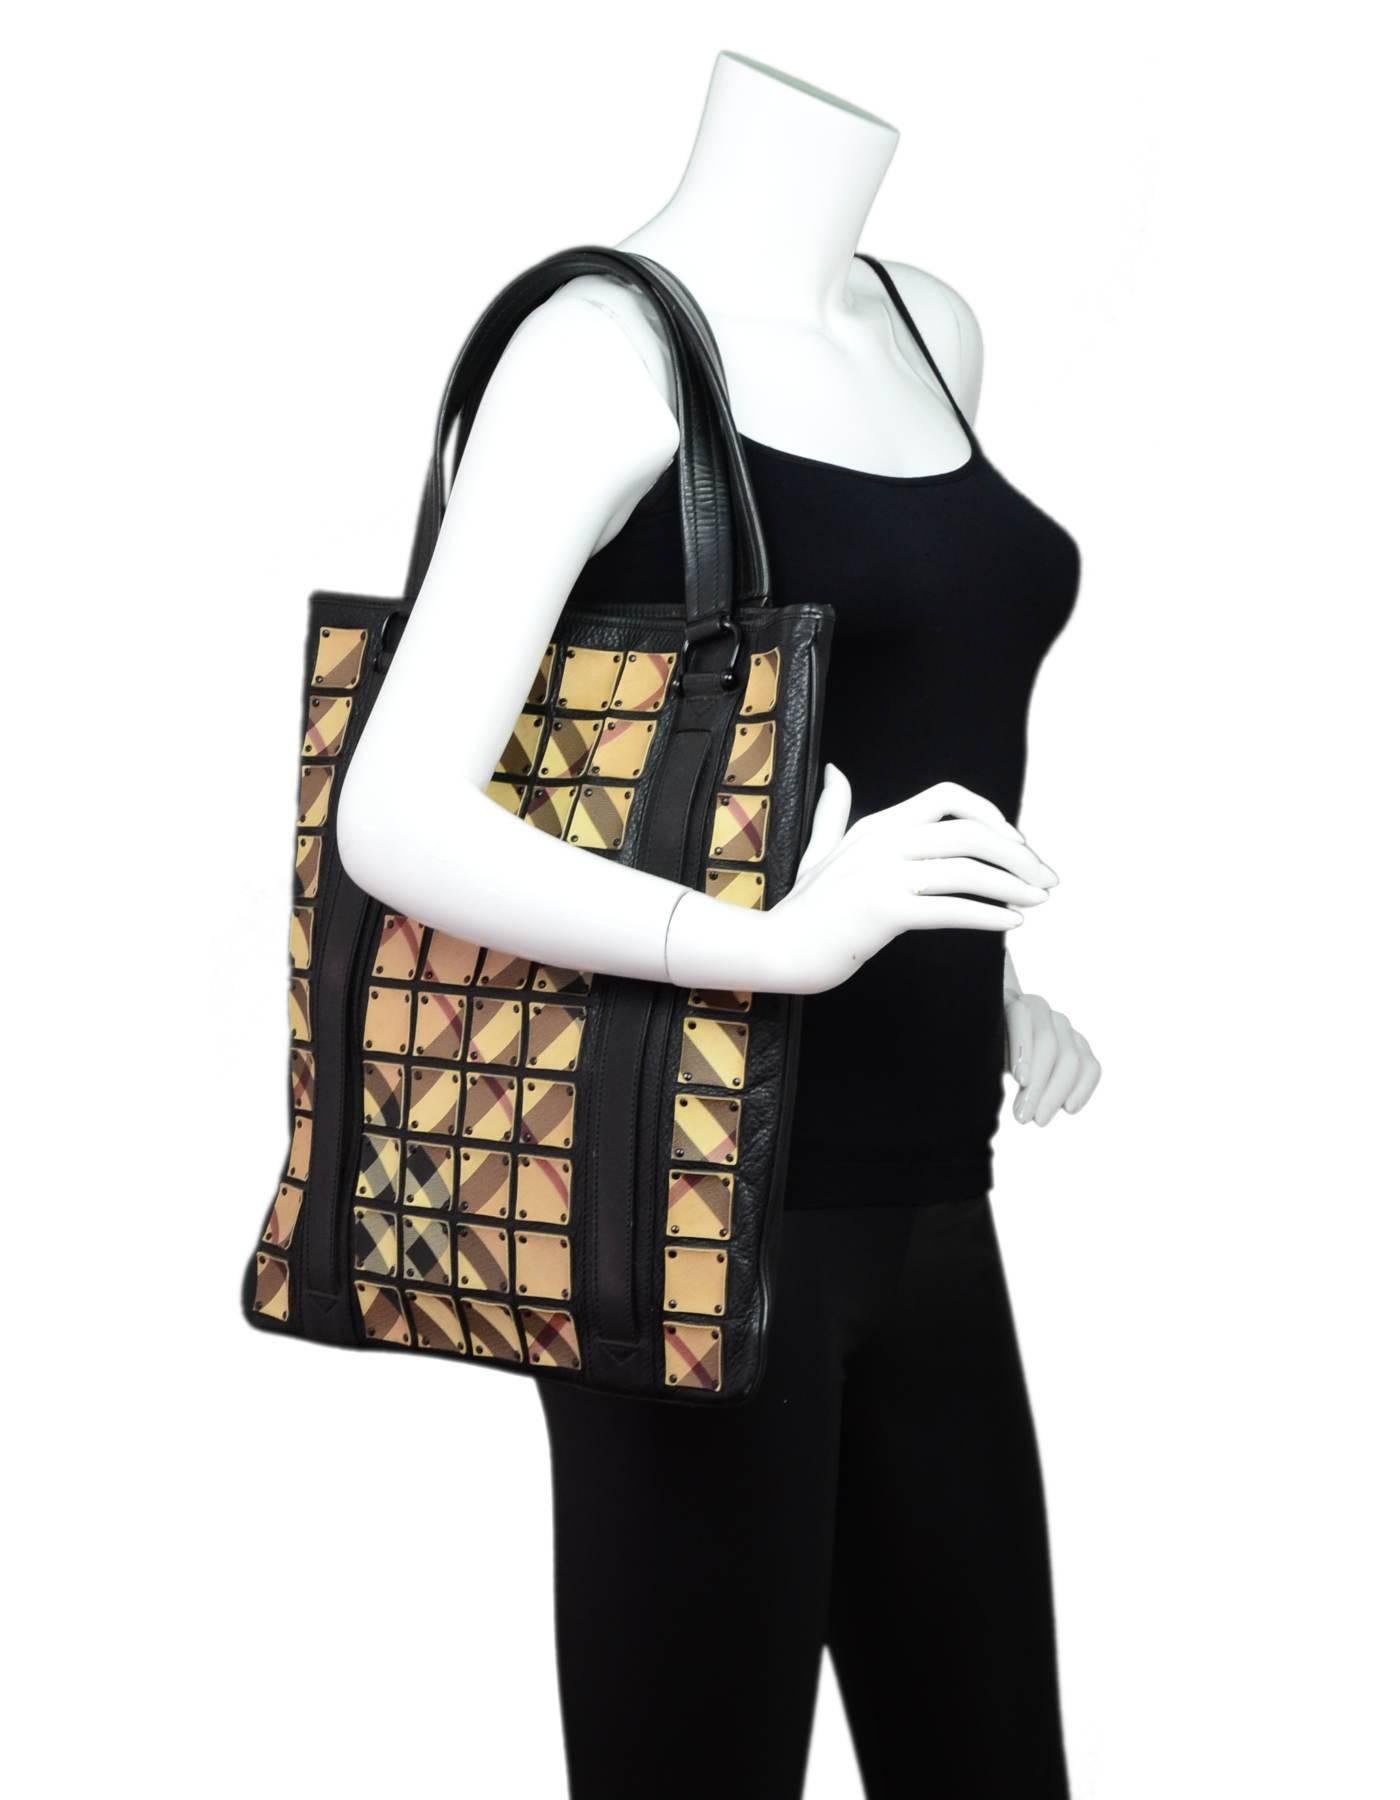 Burberry Prorsum Nova Plaid Leather Tote

Made In: Italy
Color: Black, tan
Hardware: Black
Materials: Leather, metal
Lining: Tan textile
Closure/Opening: Open top with center snap
Exterior Pockets: None
Interior Pockets: One zip wall pocket, three